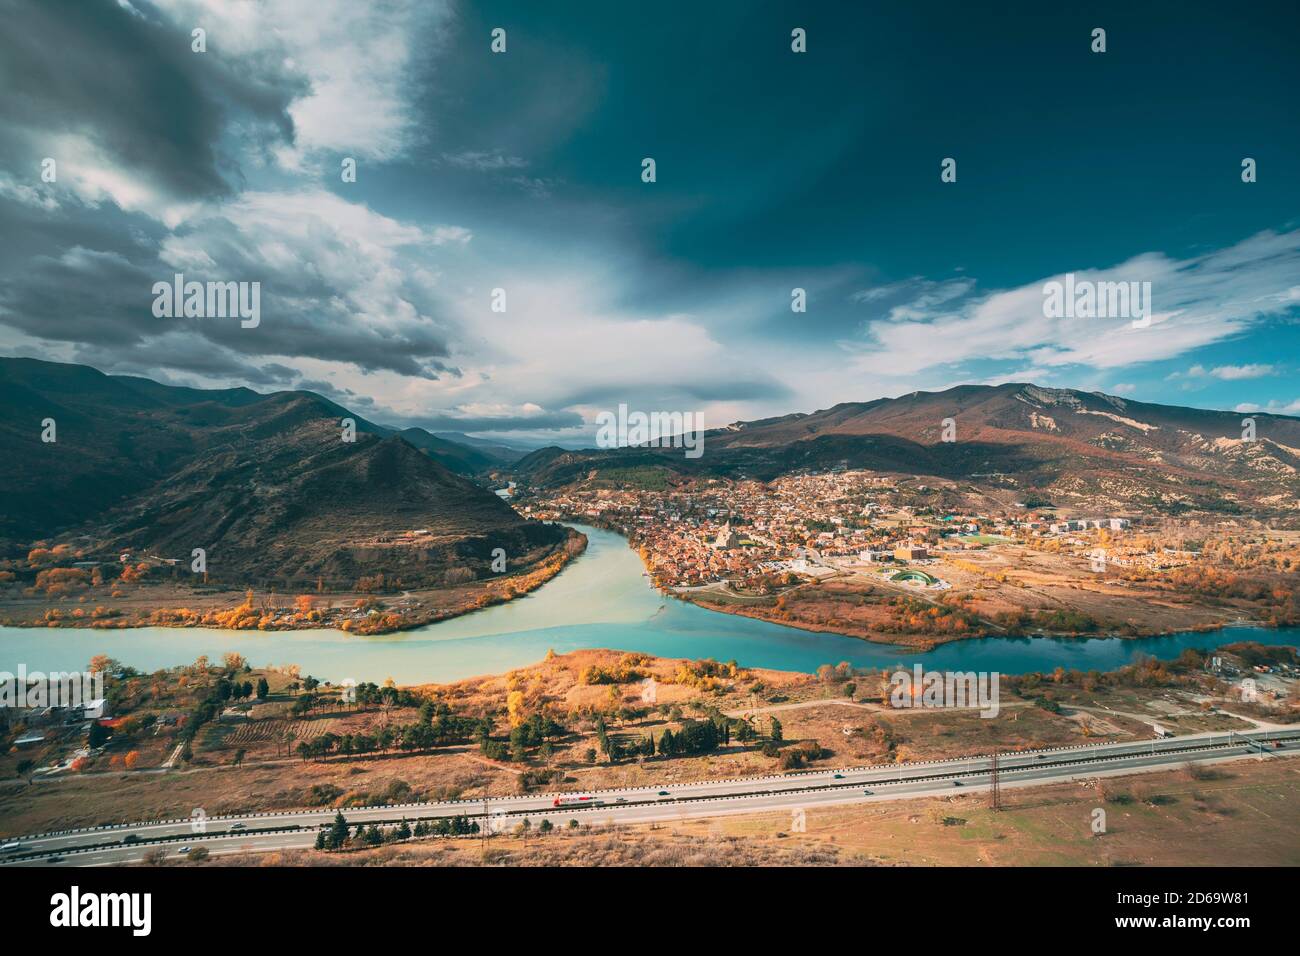 Mtskheta, Georgia. Top View Of Ancient Town Located At Valley Of Confluence Of Rivers Mtkvari Kura And Aragvi In Picturesque Highlands. Autumn Season. Stock Photo